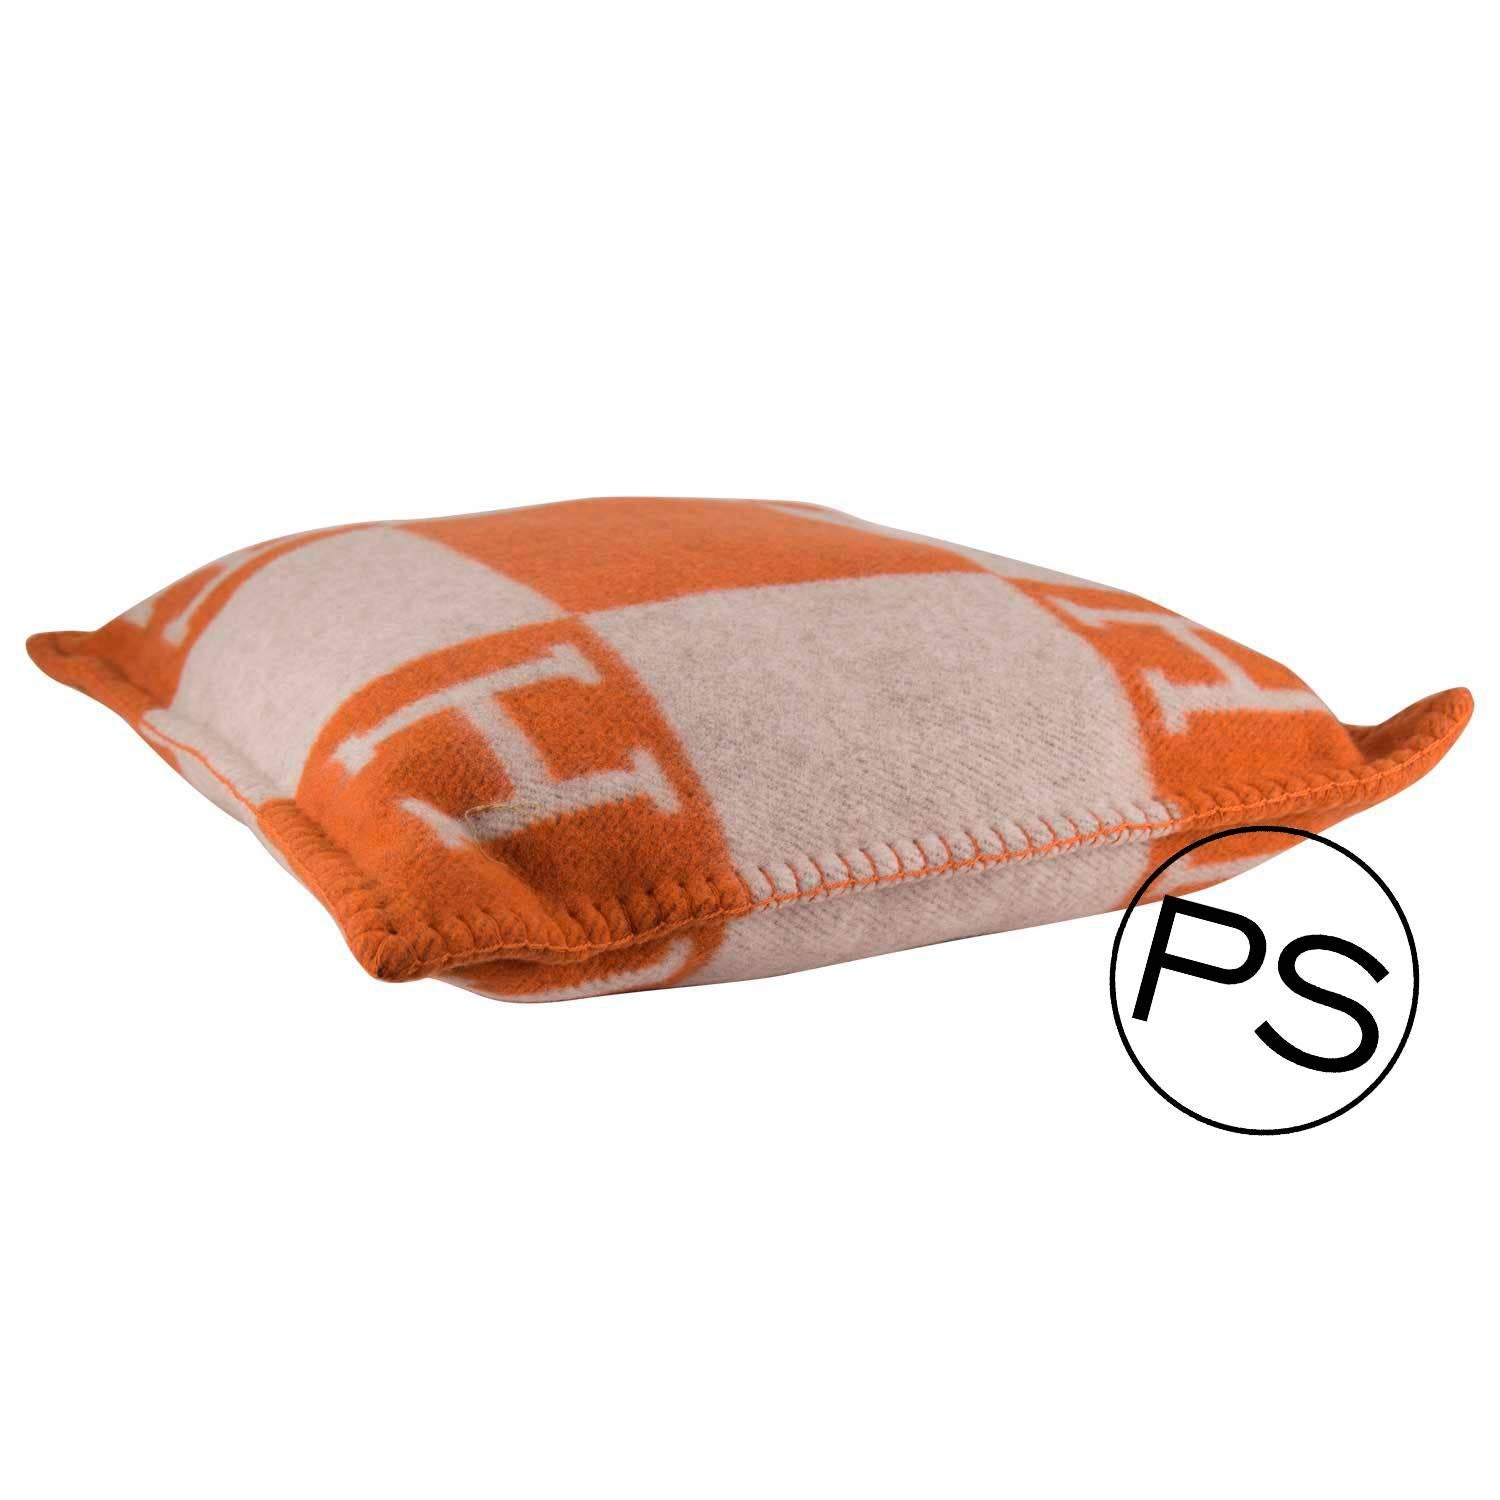 Hermes Cushion Avalon Beige Orange 2015.

Pre-owned and  never used.

Bought it in hermes store in 2015.

Model: Avalon

Composition: 85% LAINE 15% CACH

Color: Ecru-potiron

Dimensions:43x43cm

Details:

- Comes with Original